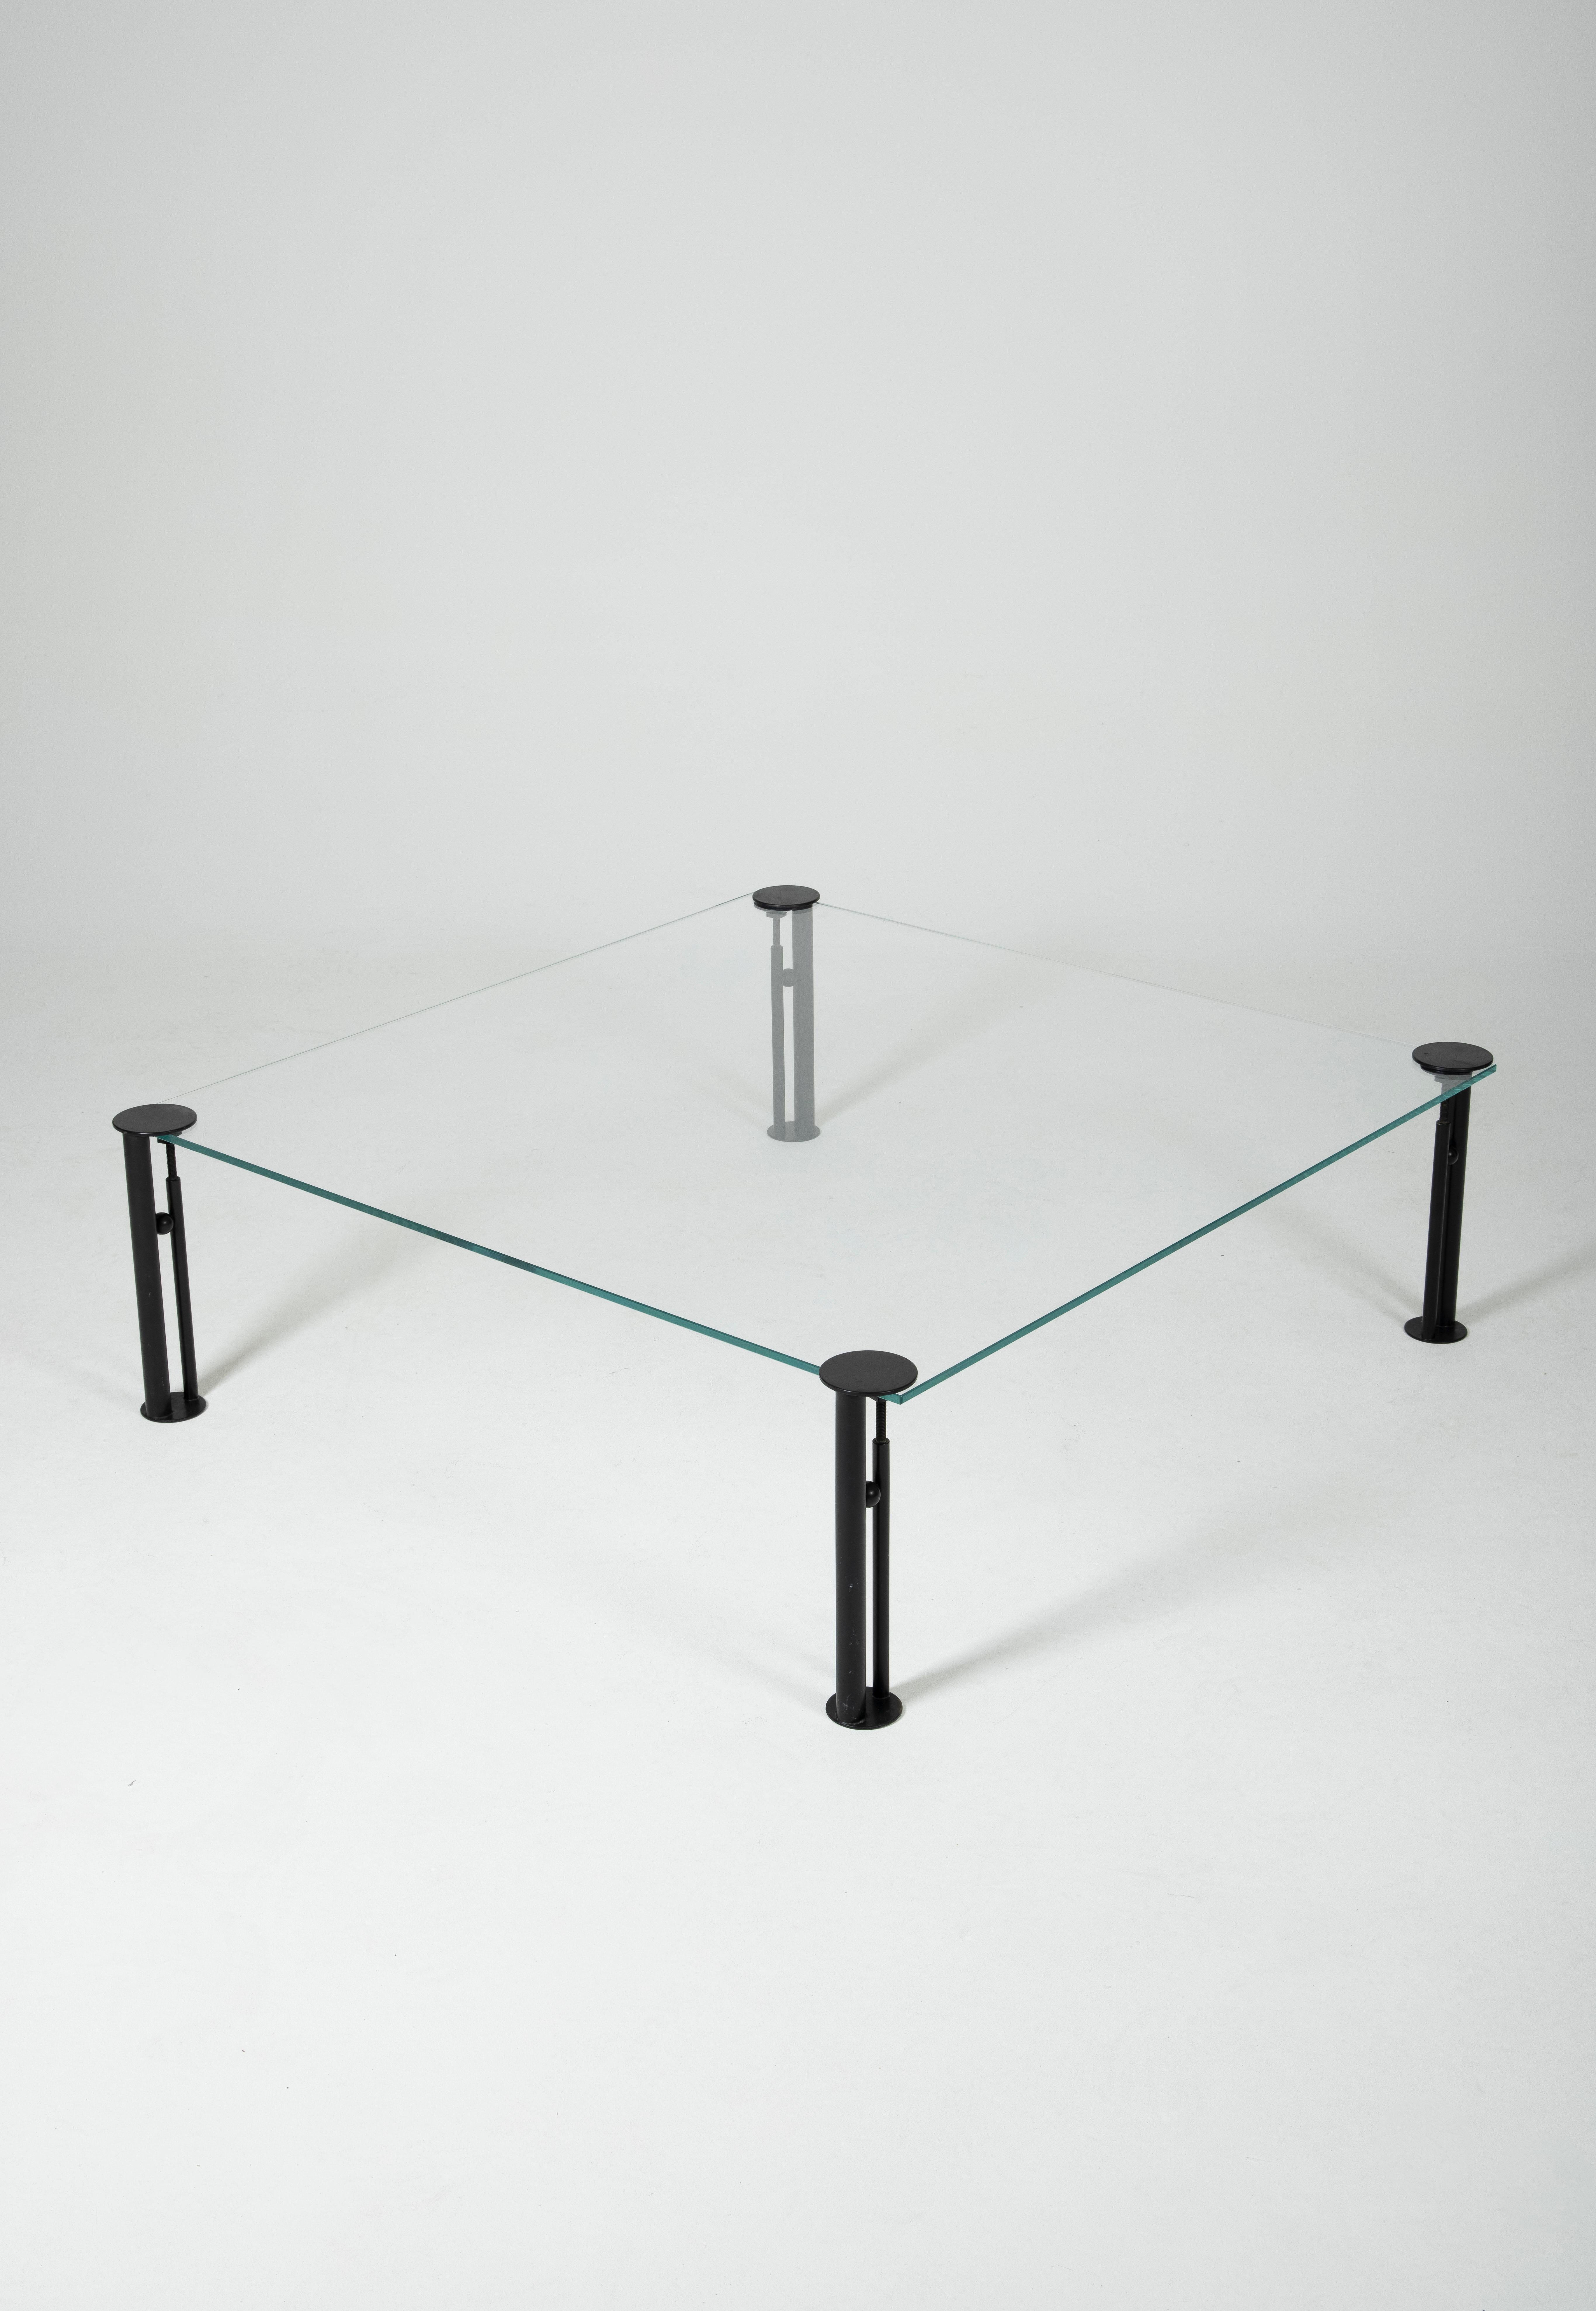 Coffee table Joe Ship by Philippe Starck, 1982. It consists of a square glass top and four adjustable black metal legs. The name of this model, Joe Ship, refers to a character from the novel Ubik by Philip K. Dick. 
Very good condition.
LP617